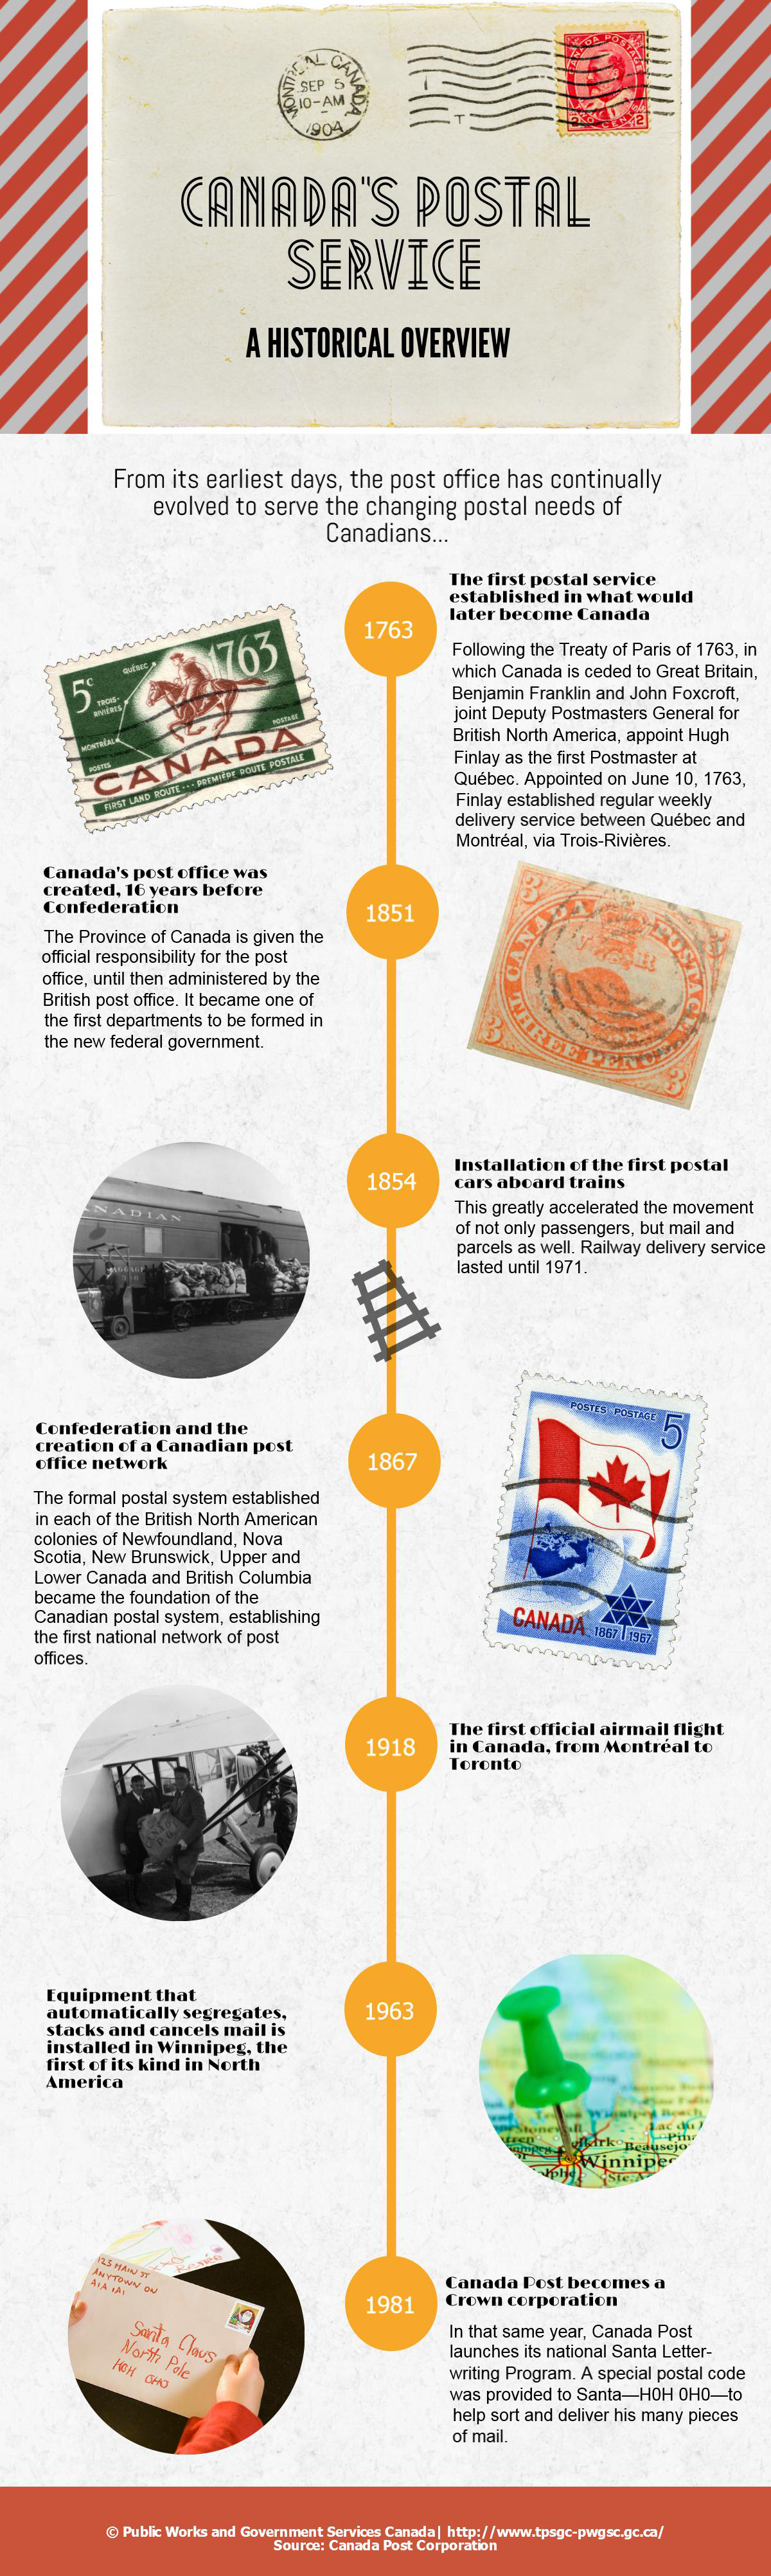 Infographic: Canada's postal service: a historical overview infographic